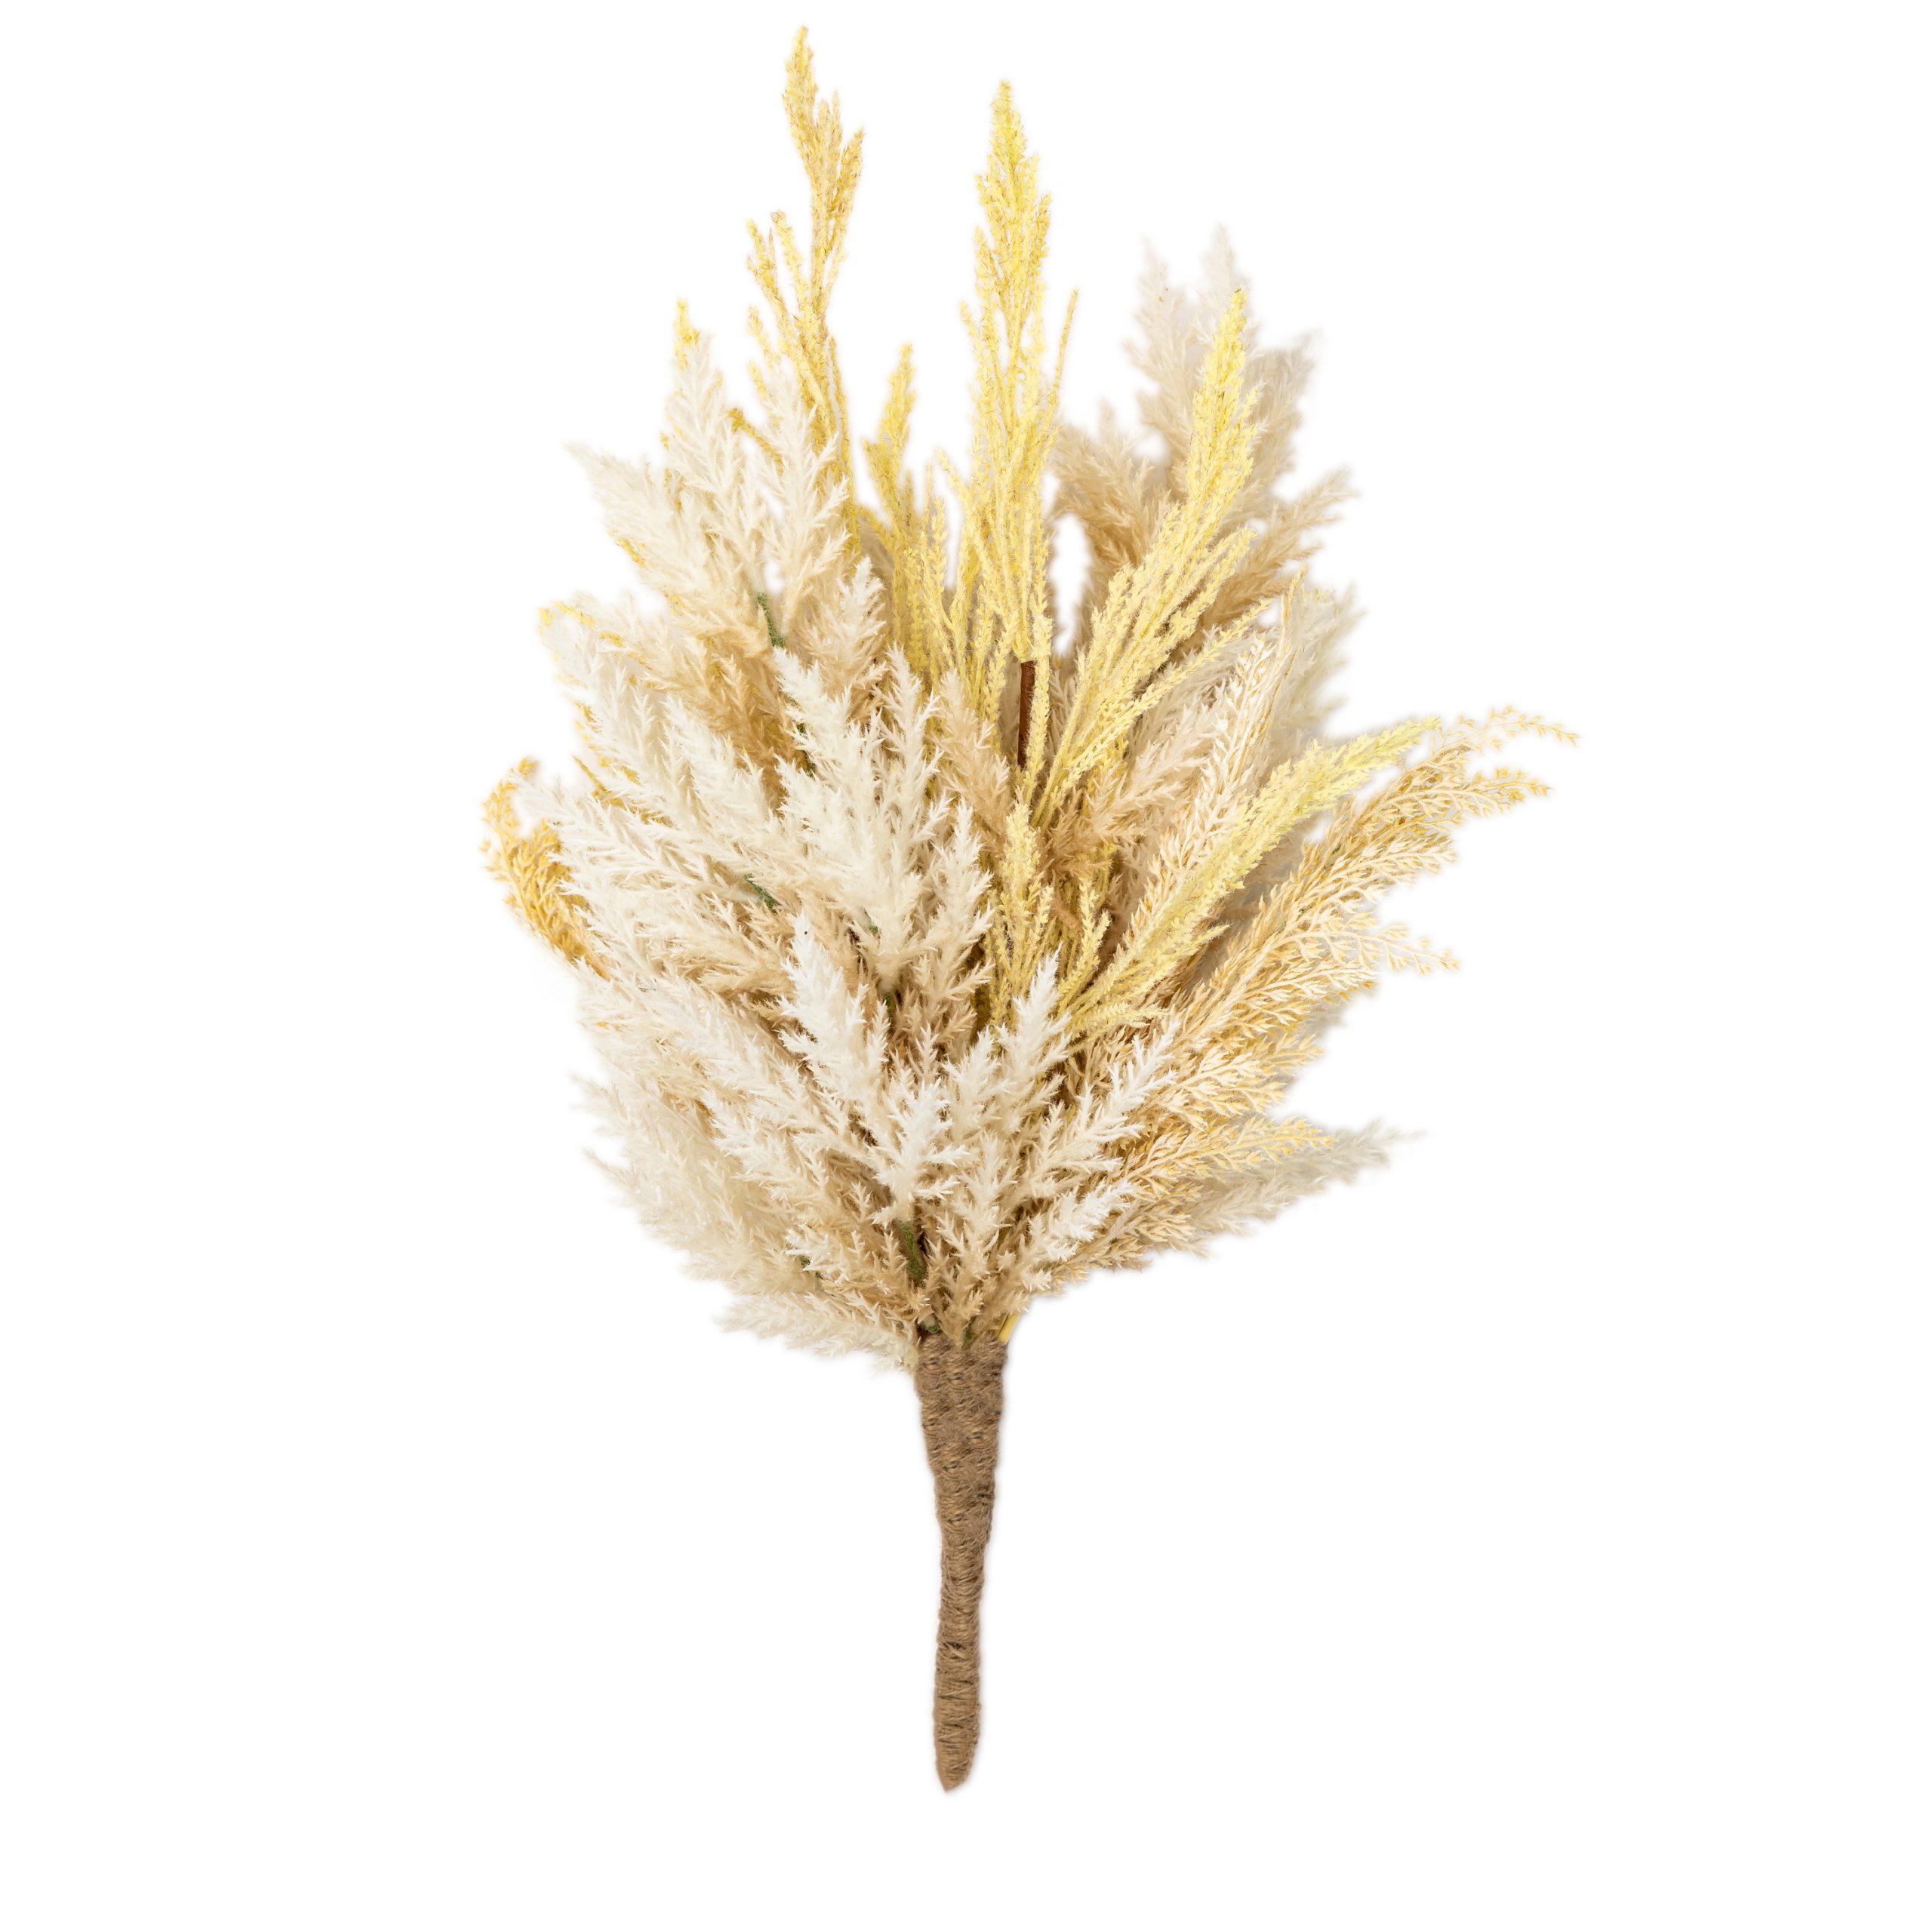 Gallery Direct Dry Grass Bouquet Large